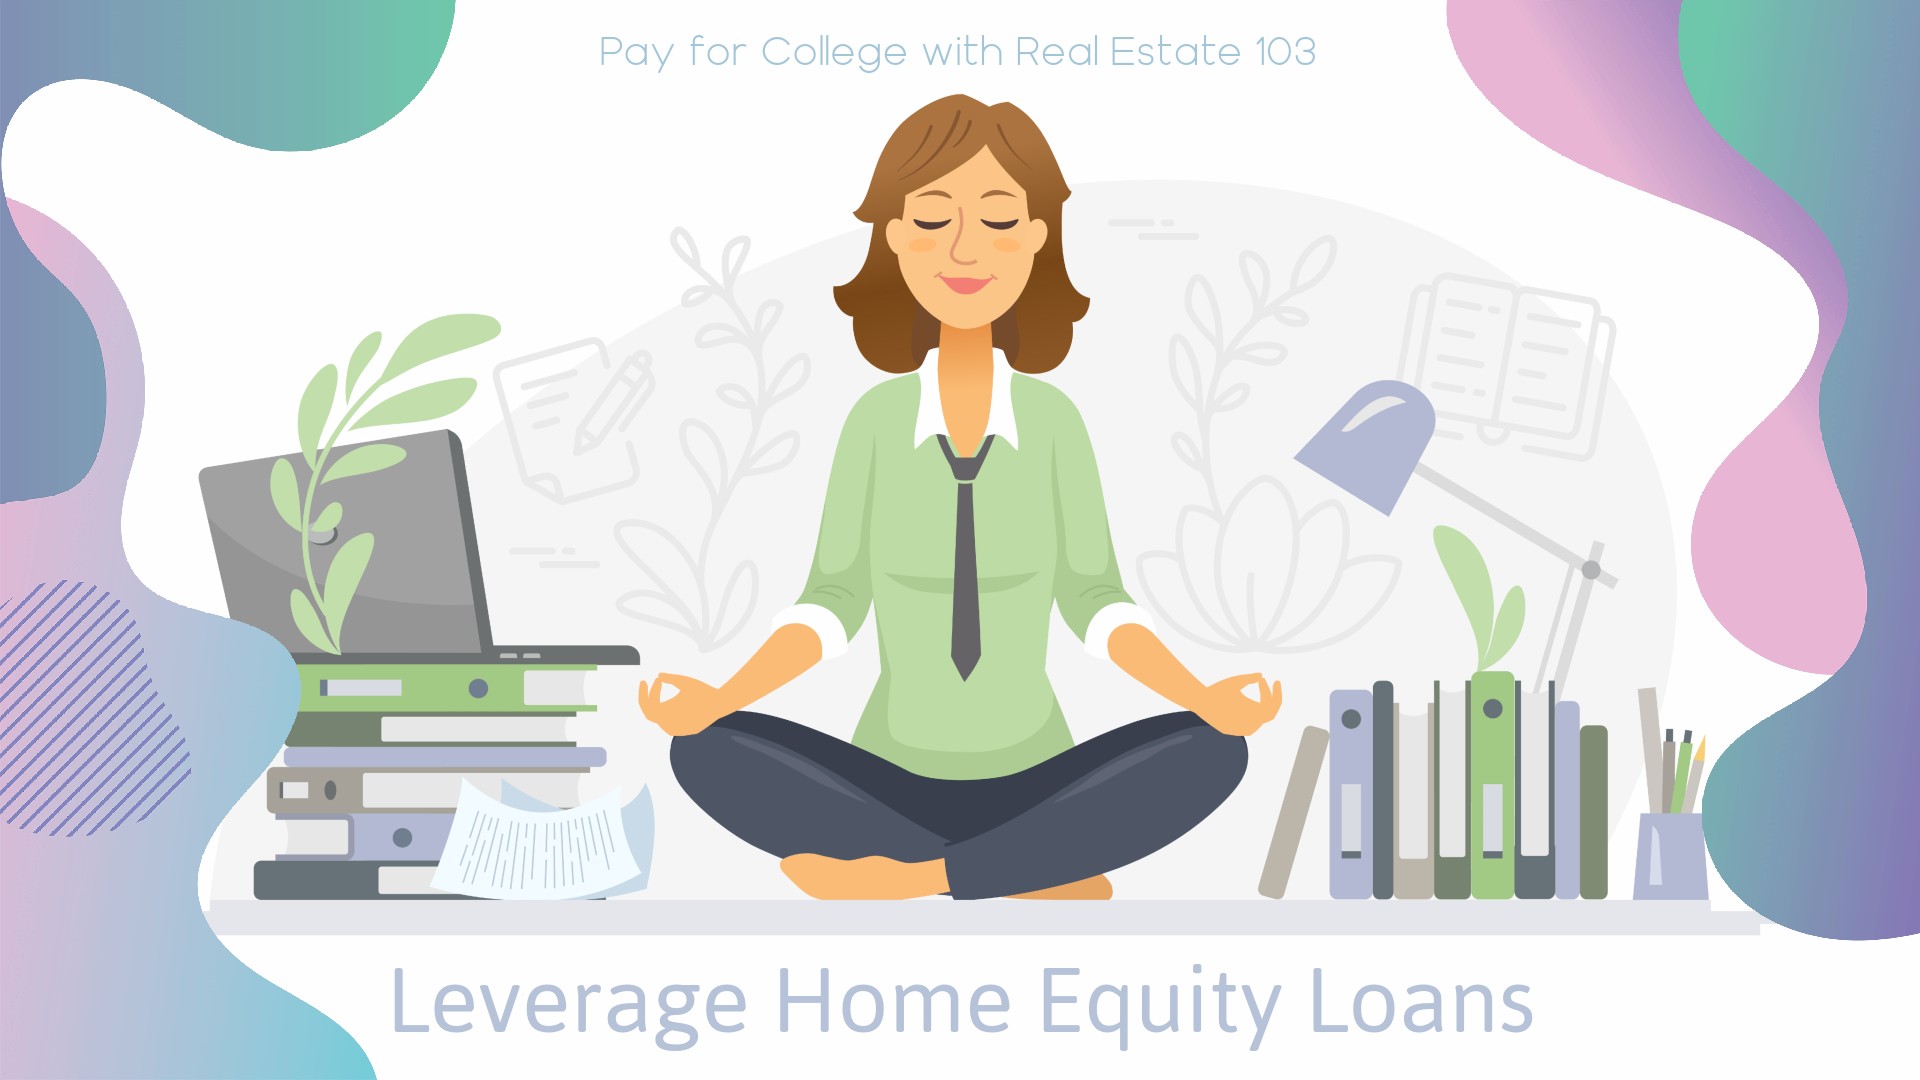 Pay for College with Real Estate 103: Leverage Home Equity Loans